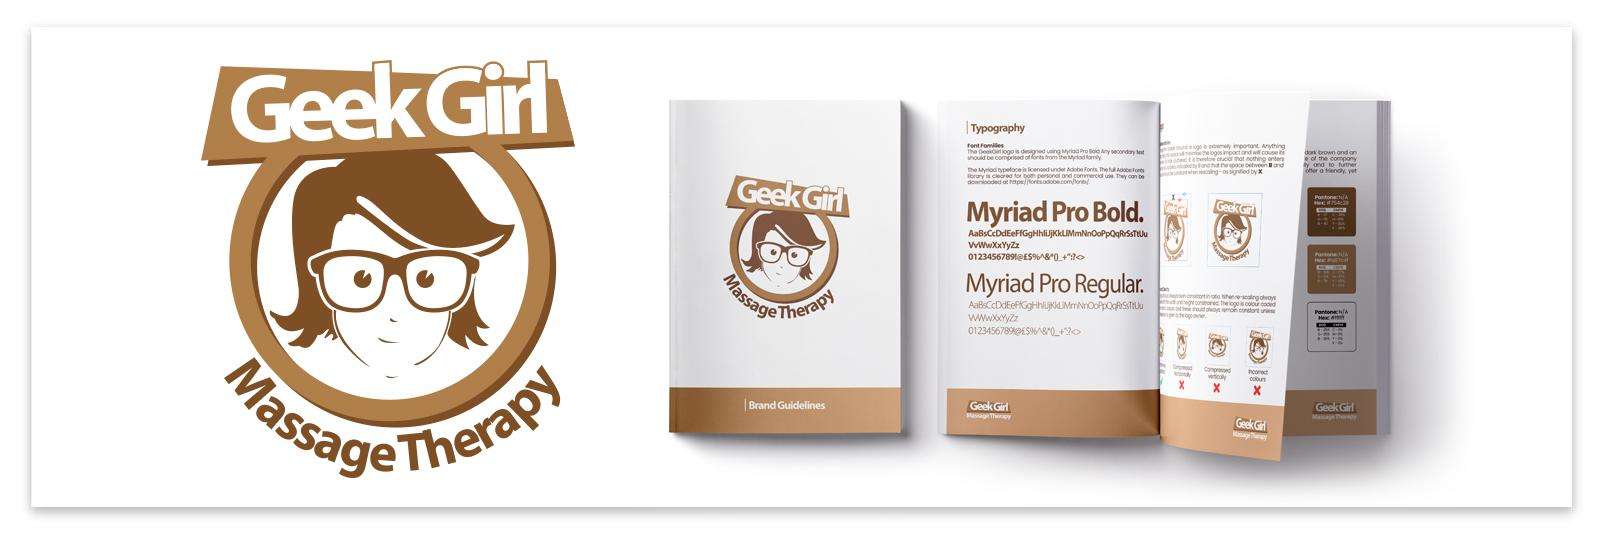 image of Geek Girl Massage Therapy logo and branding guide